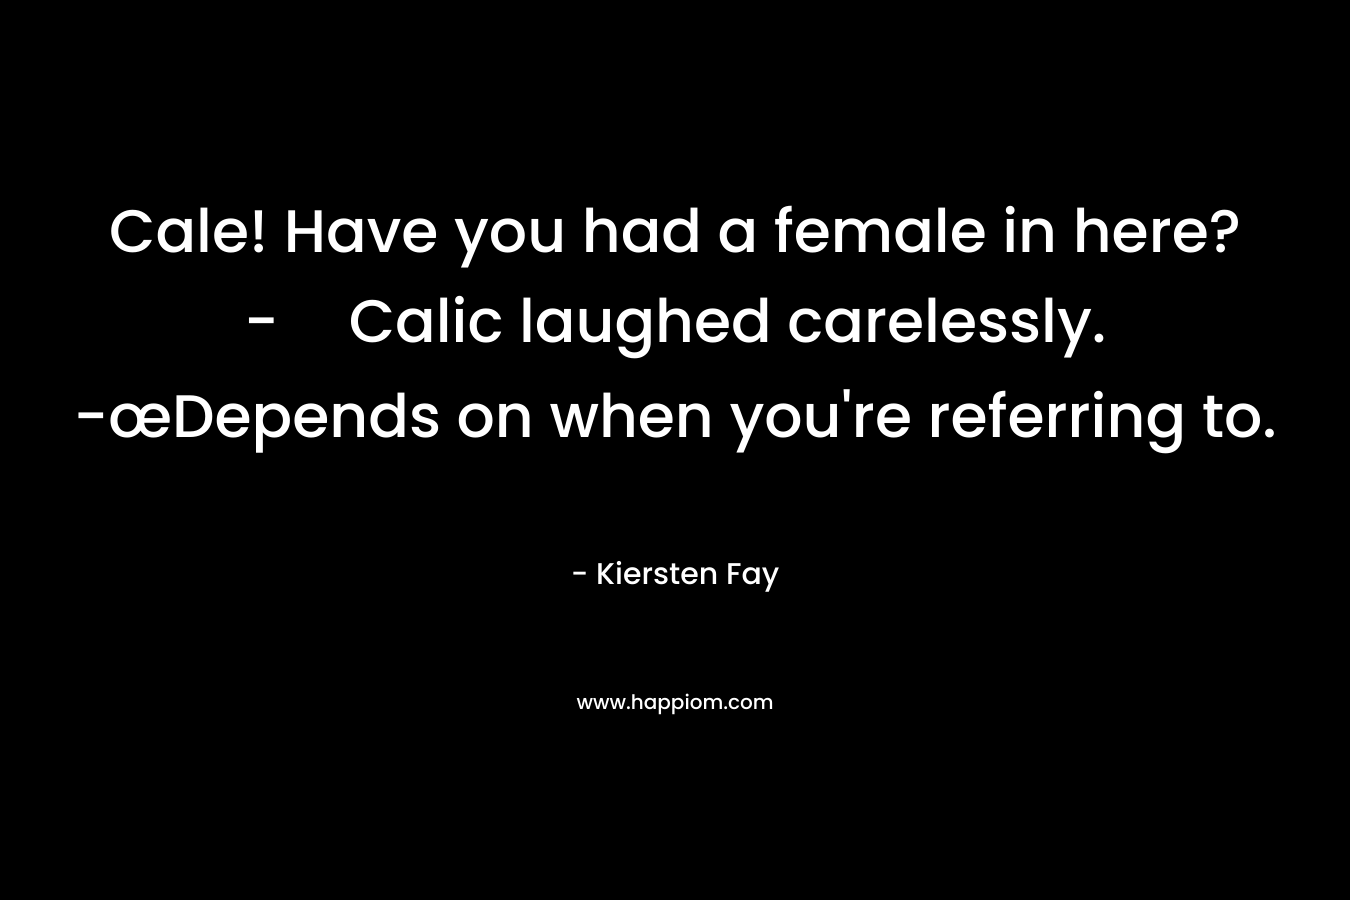 Cale! Have you had a female in here?-Calic laughed carelessly. -œDepends on when you’re referring to. – Kiersten Fay